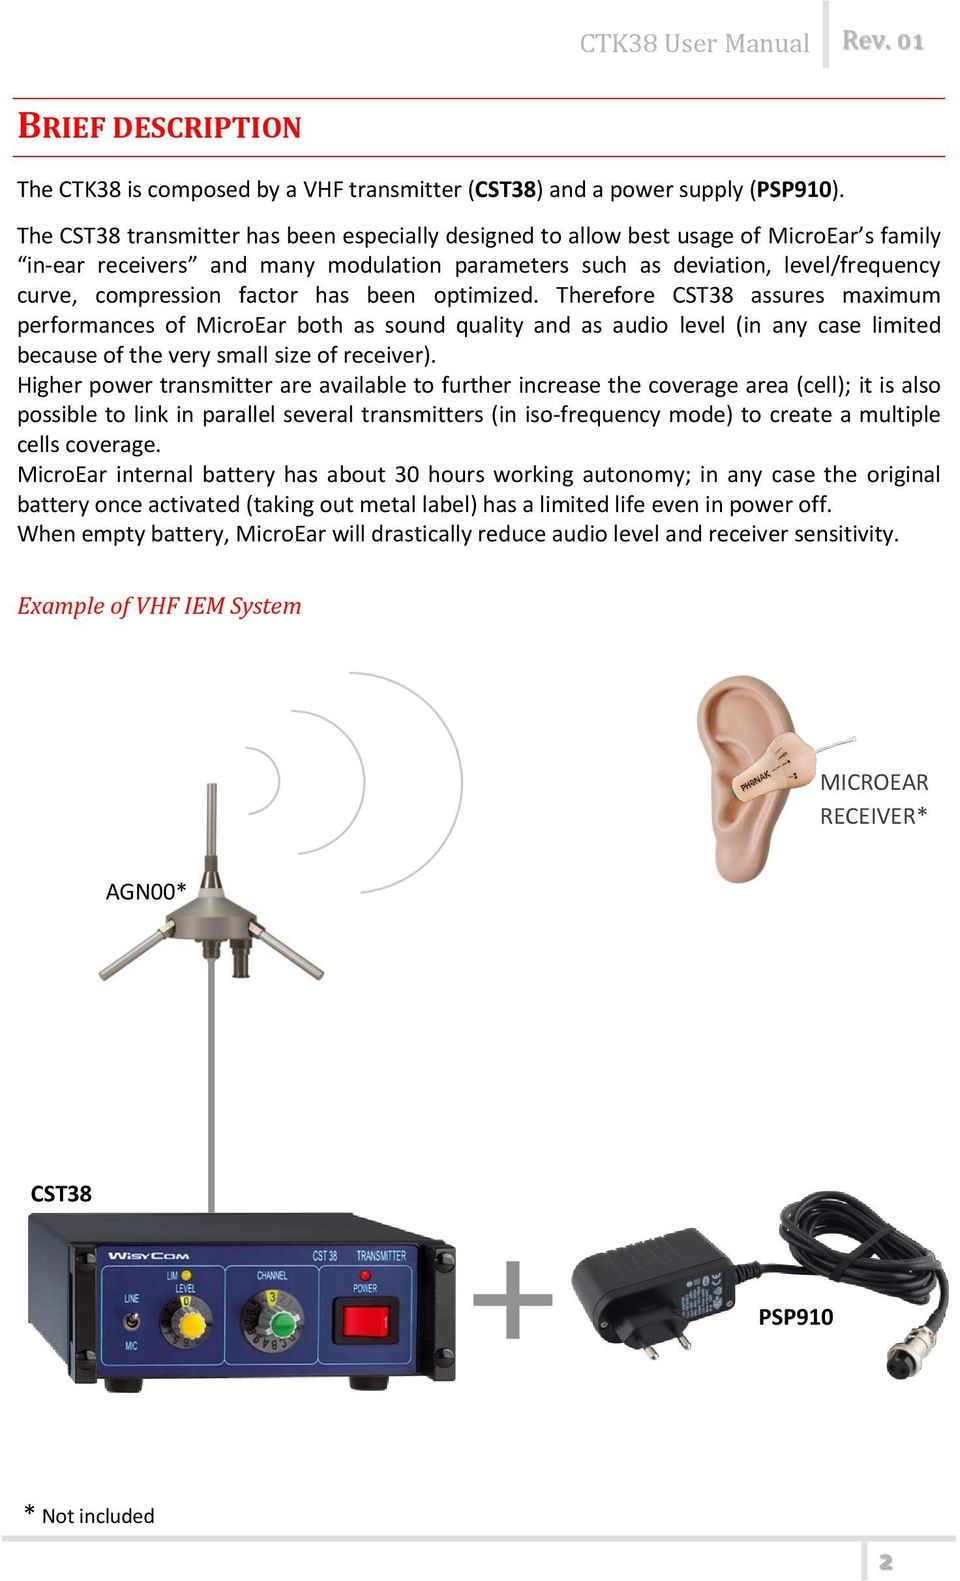 factor has been optimized. Therefore CST38 assures maximum performances of MicroEar both as sound quality and as audio level (in any case limited because of the very small size of receiver).